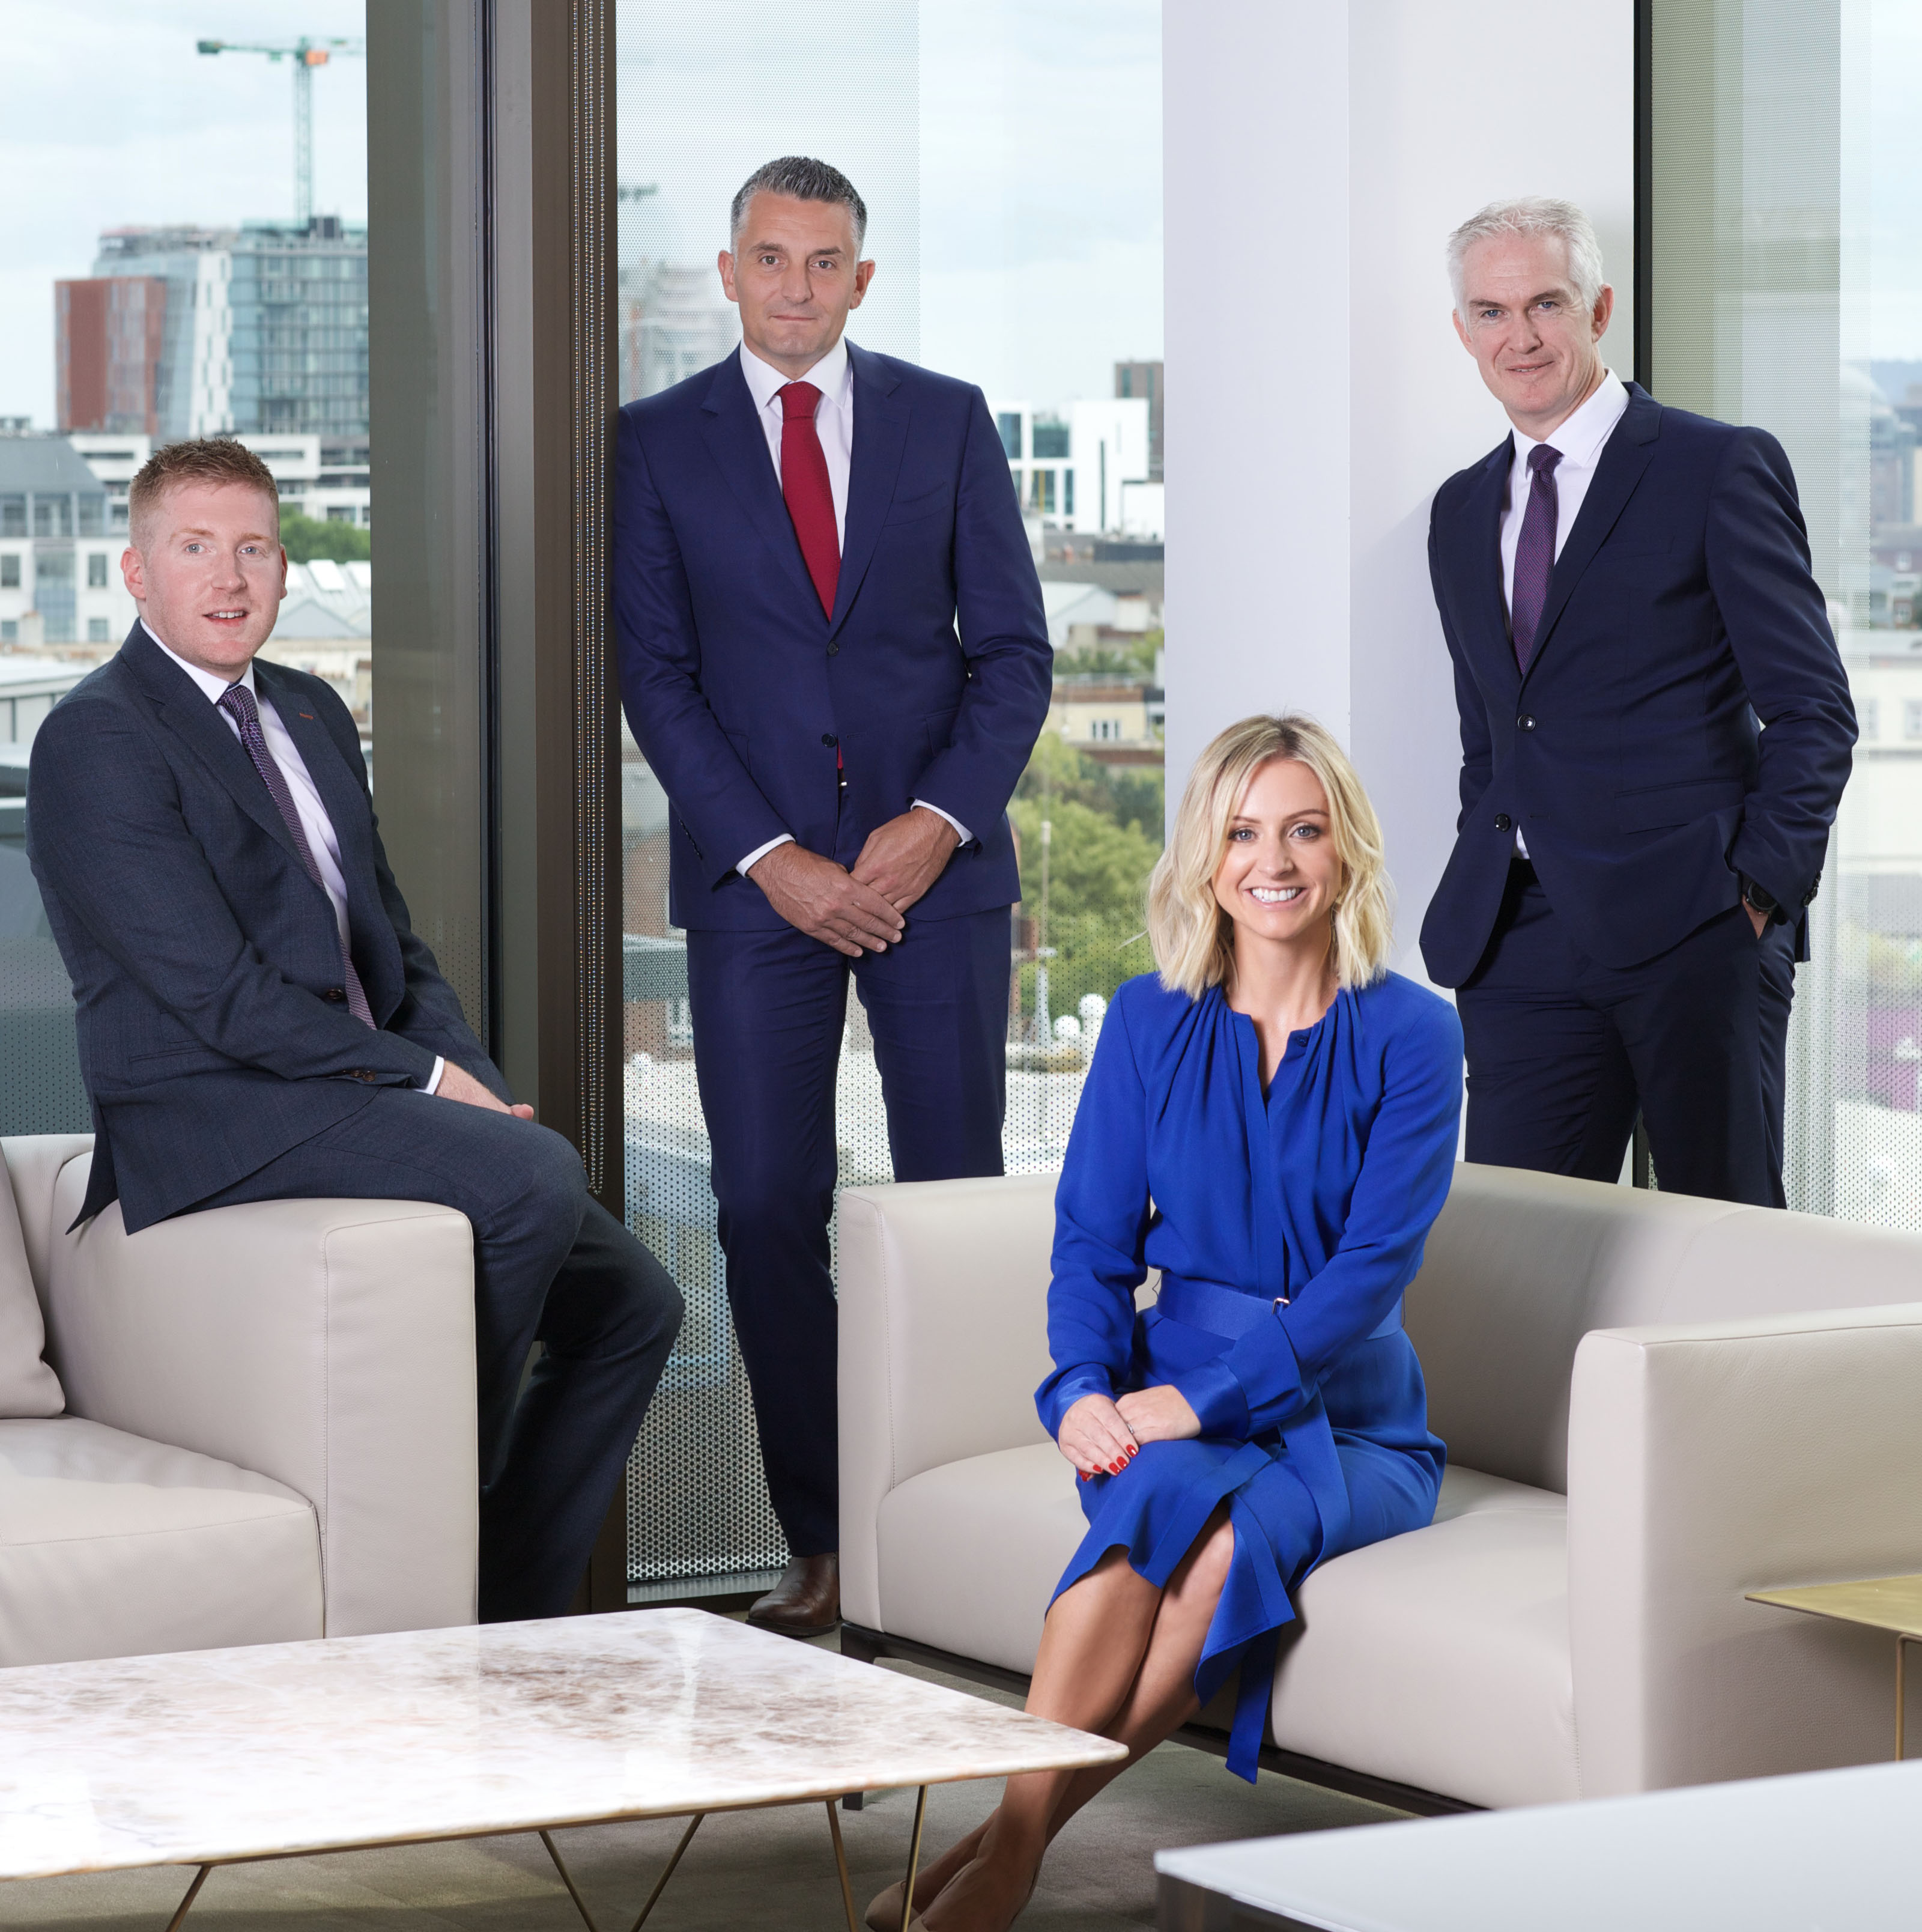 Grant Thornton appoints two new partners